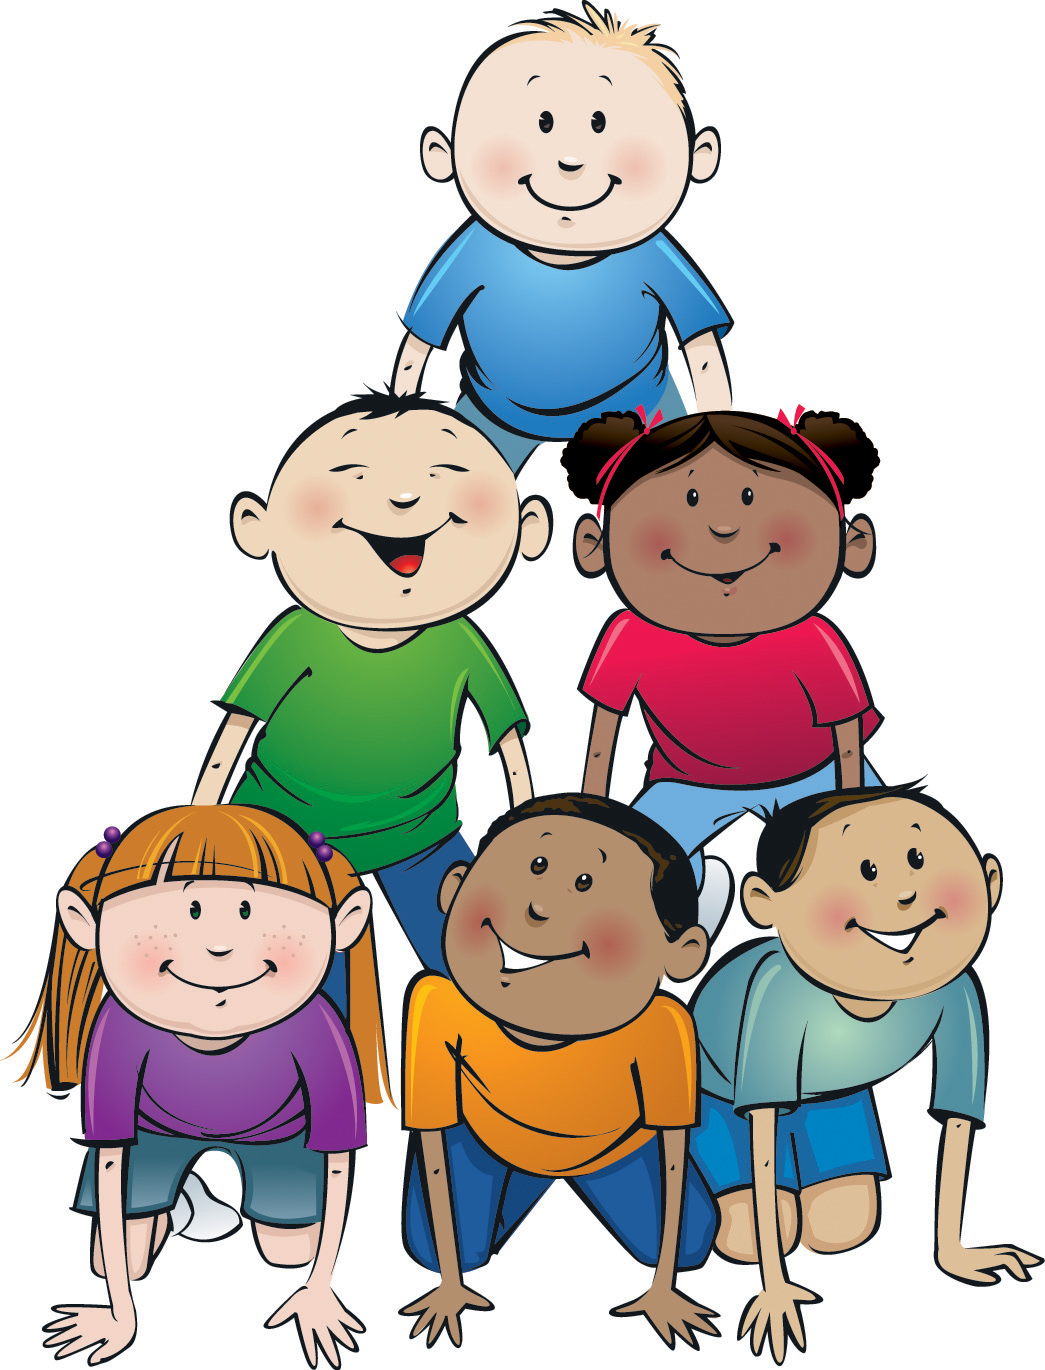 childrens clipart collection full download - photo #43